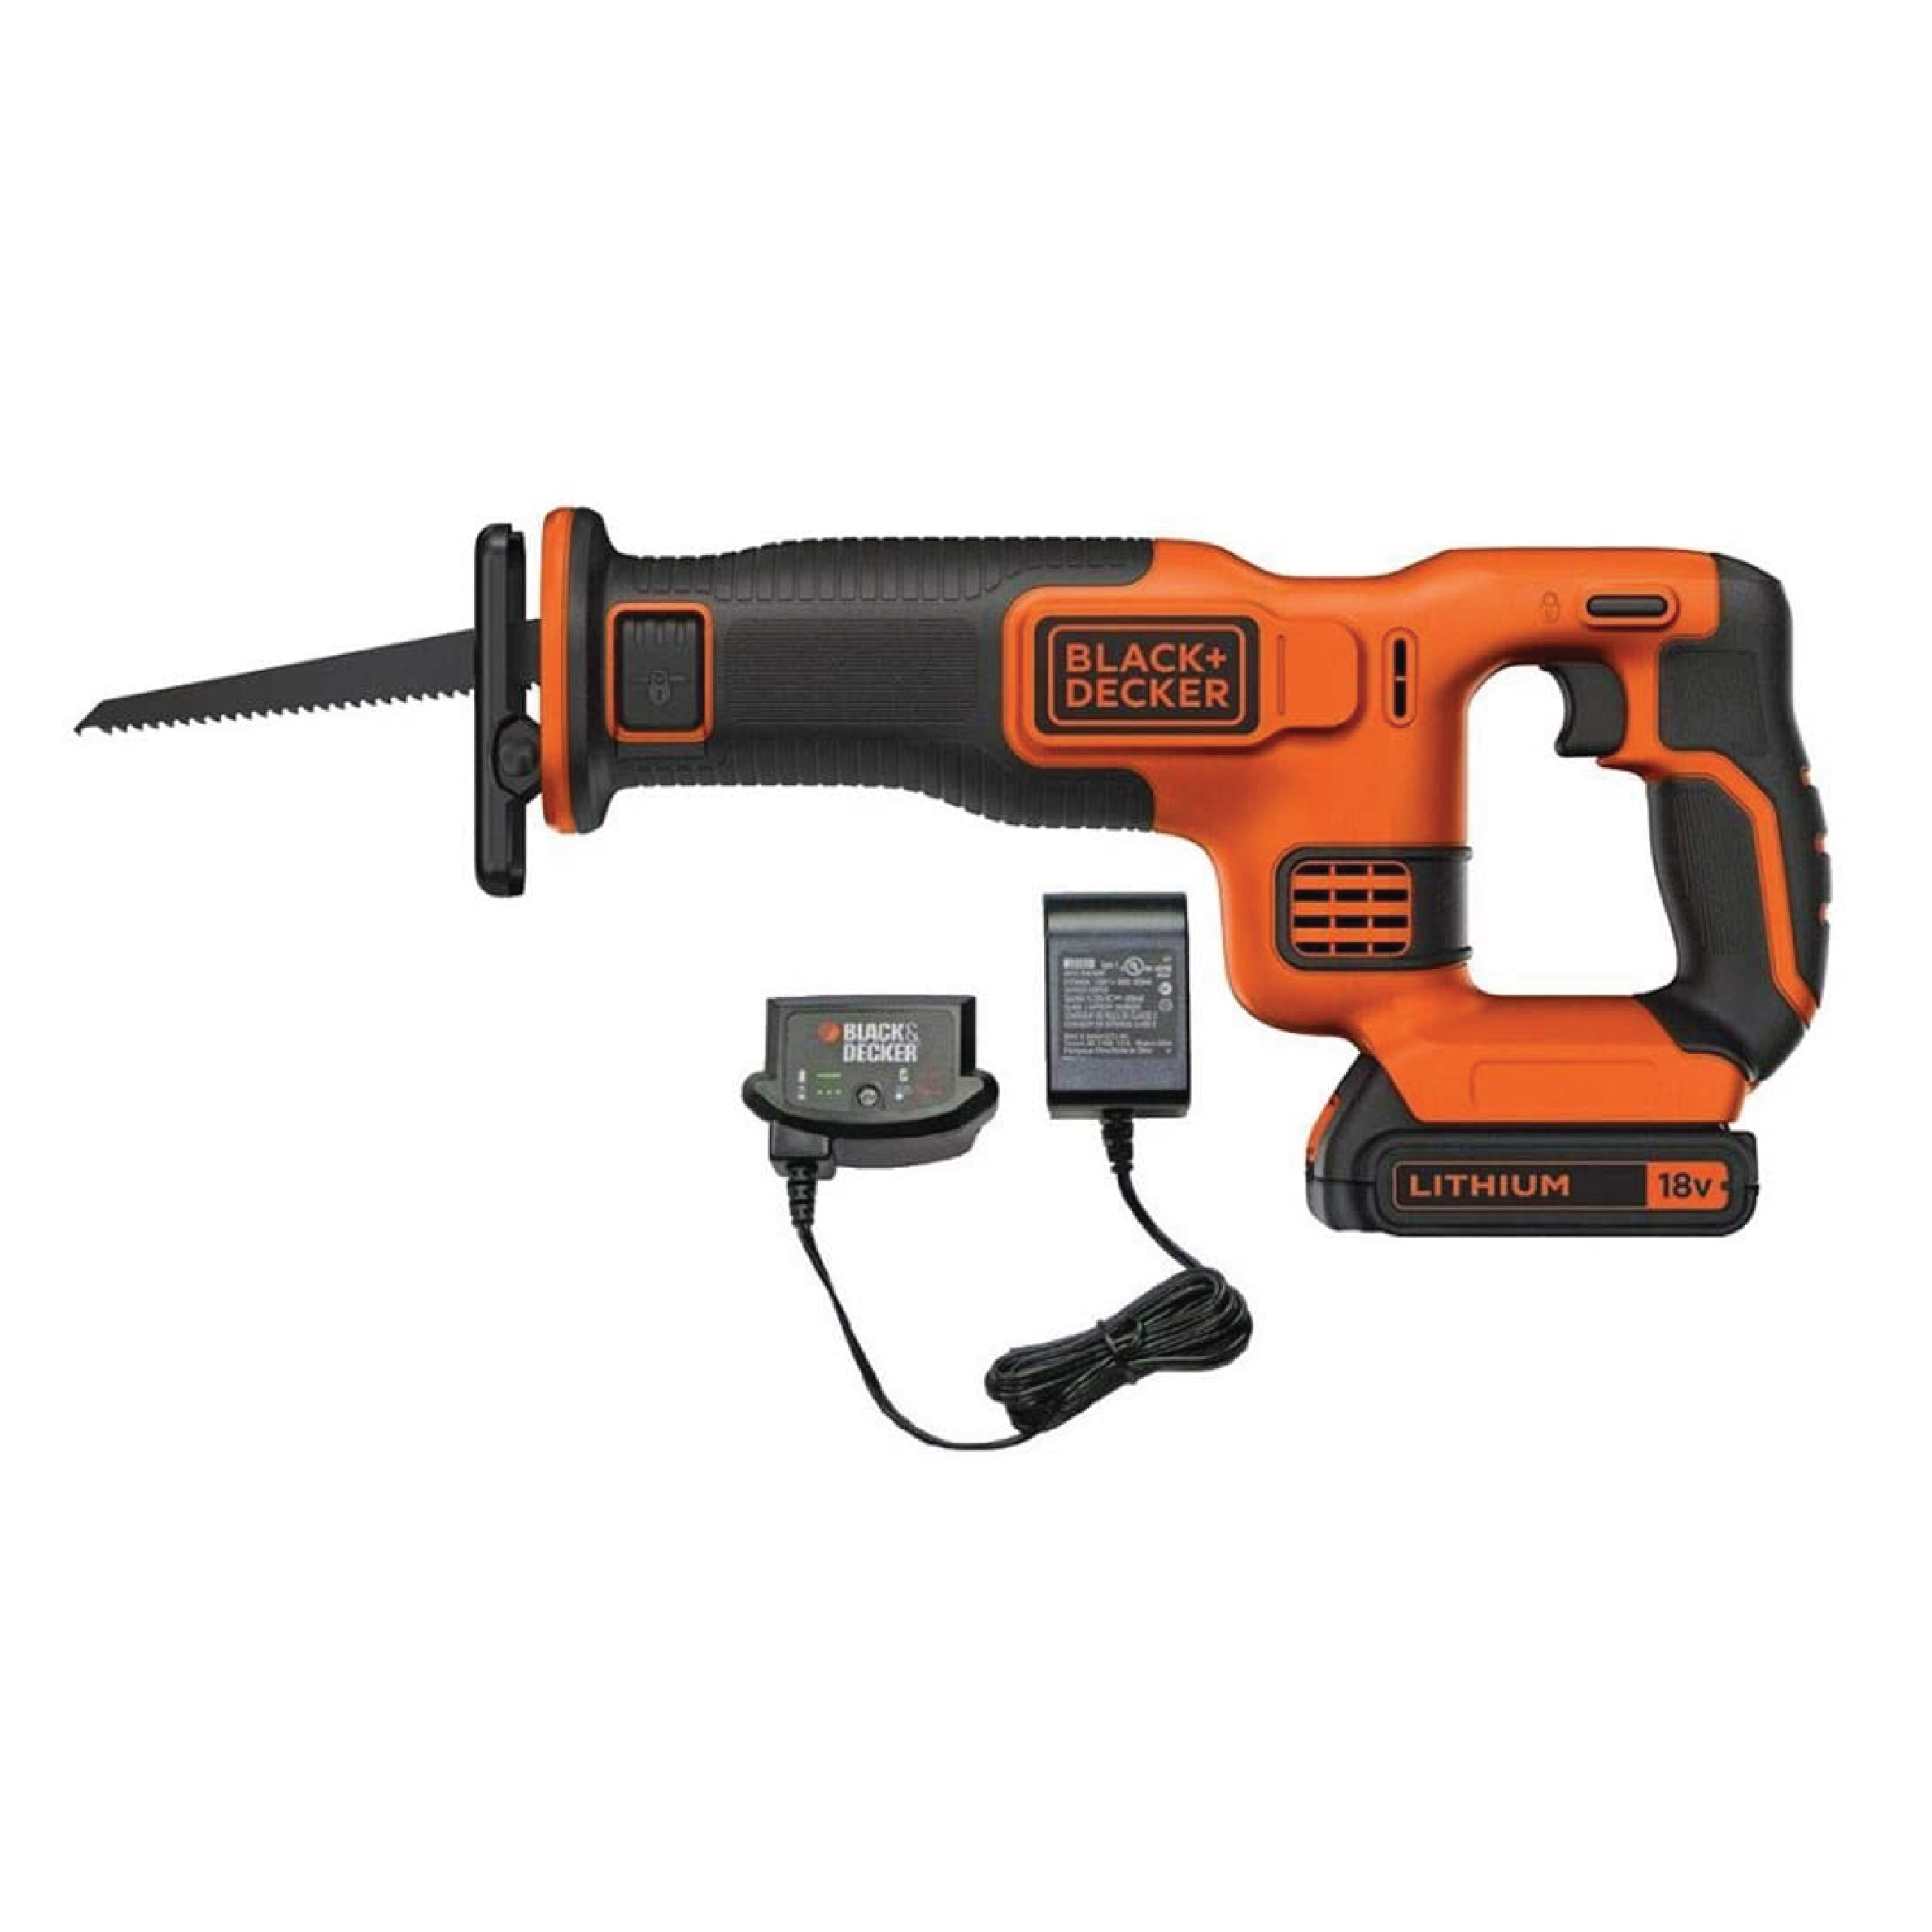 Black+Decker BDCR18 Cordless Reciprocating Saw ( INCLUDES - 18 V, 22 mm Stroke Length, 110 mm Cutting Depth, Tool-Free Blade Change, Battery, Charger)